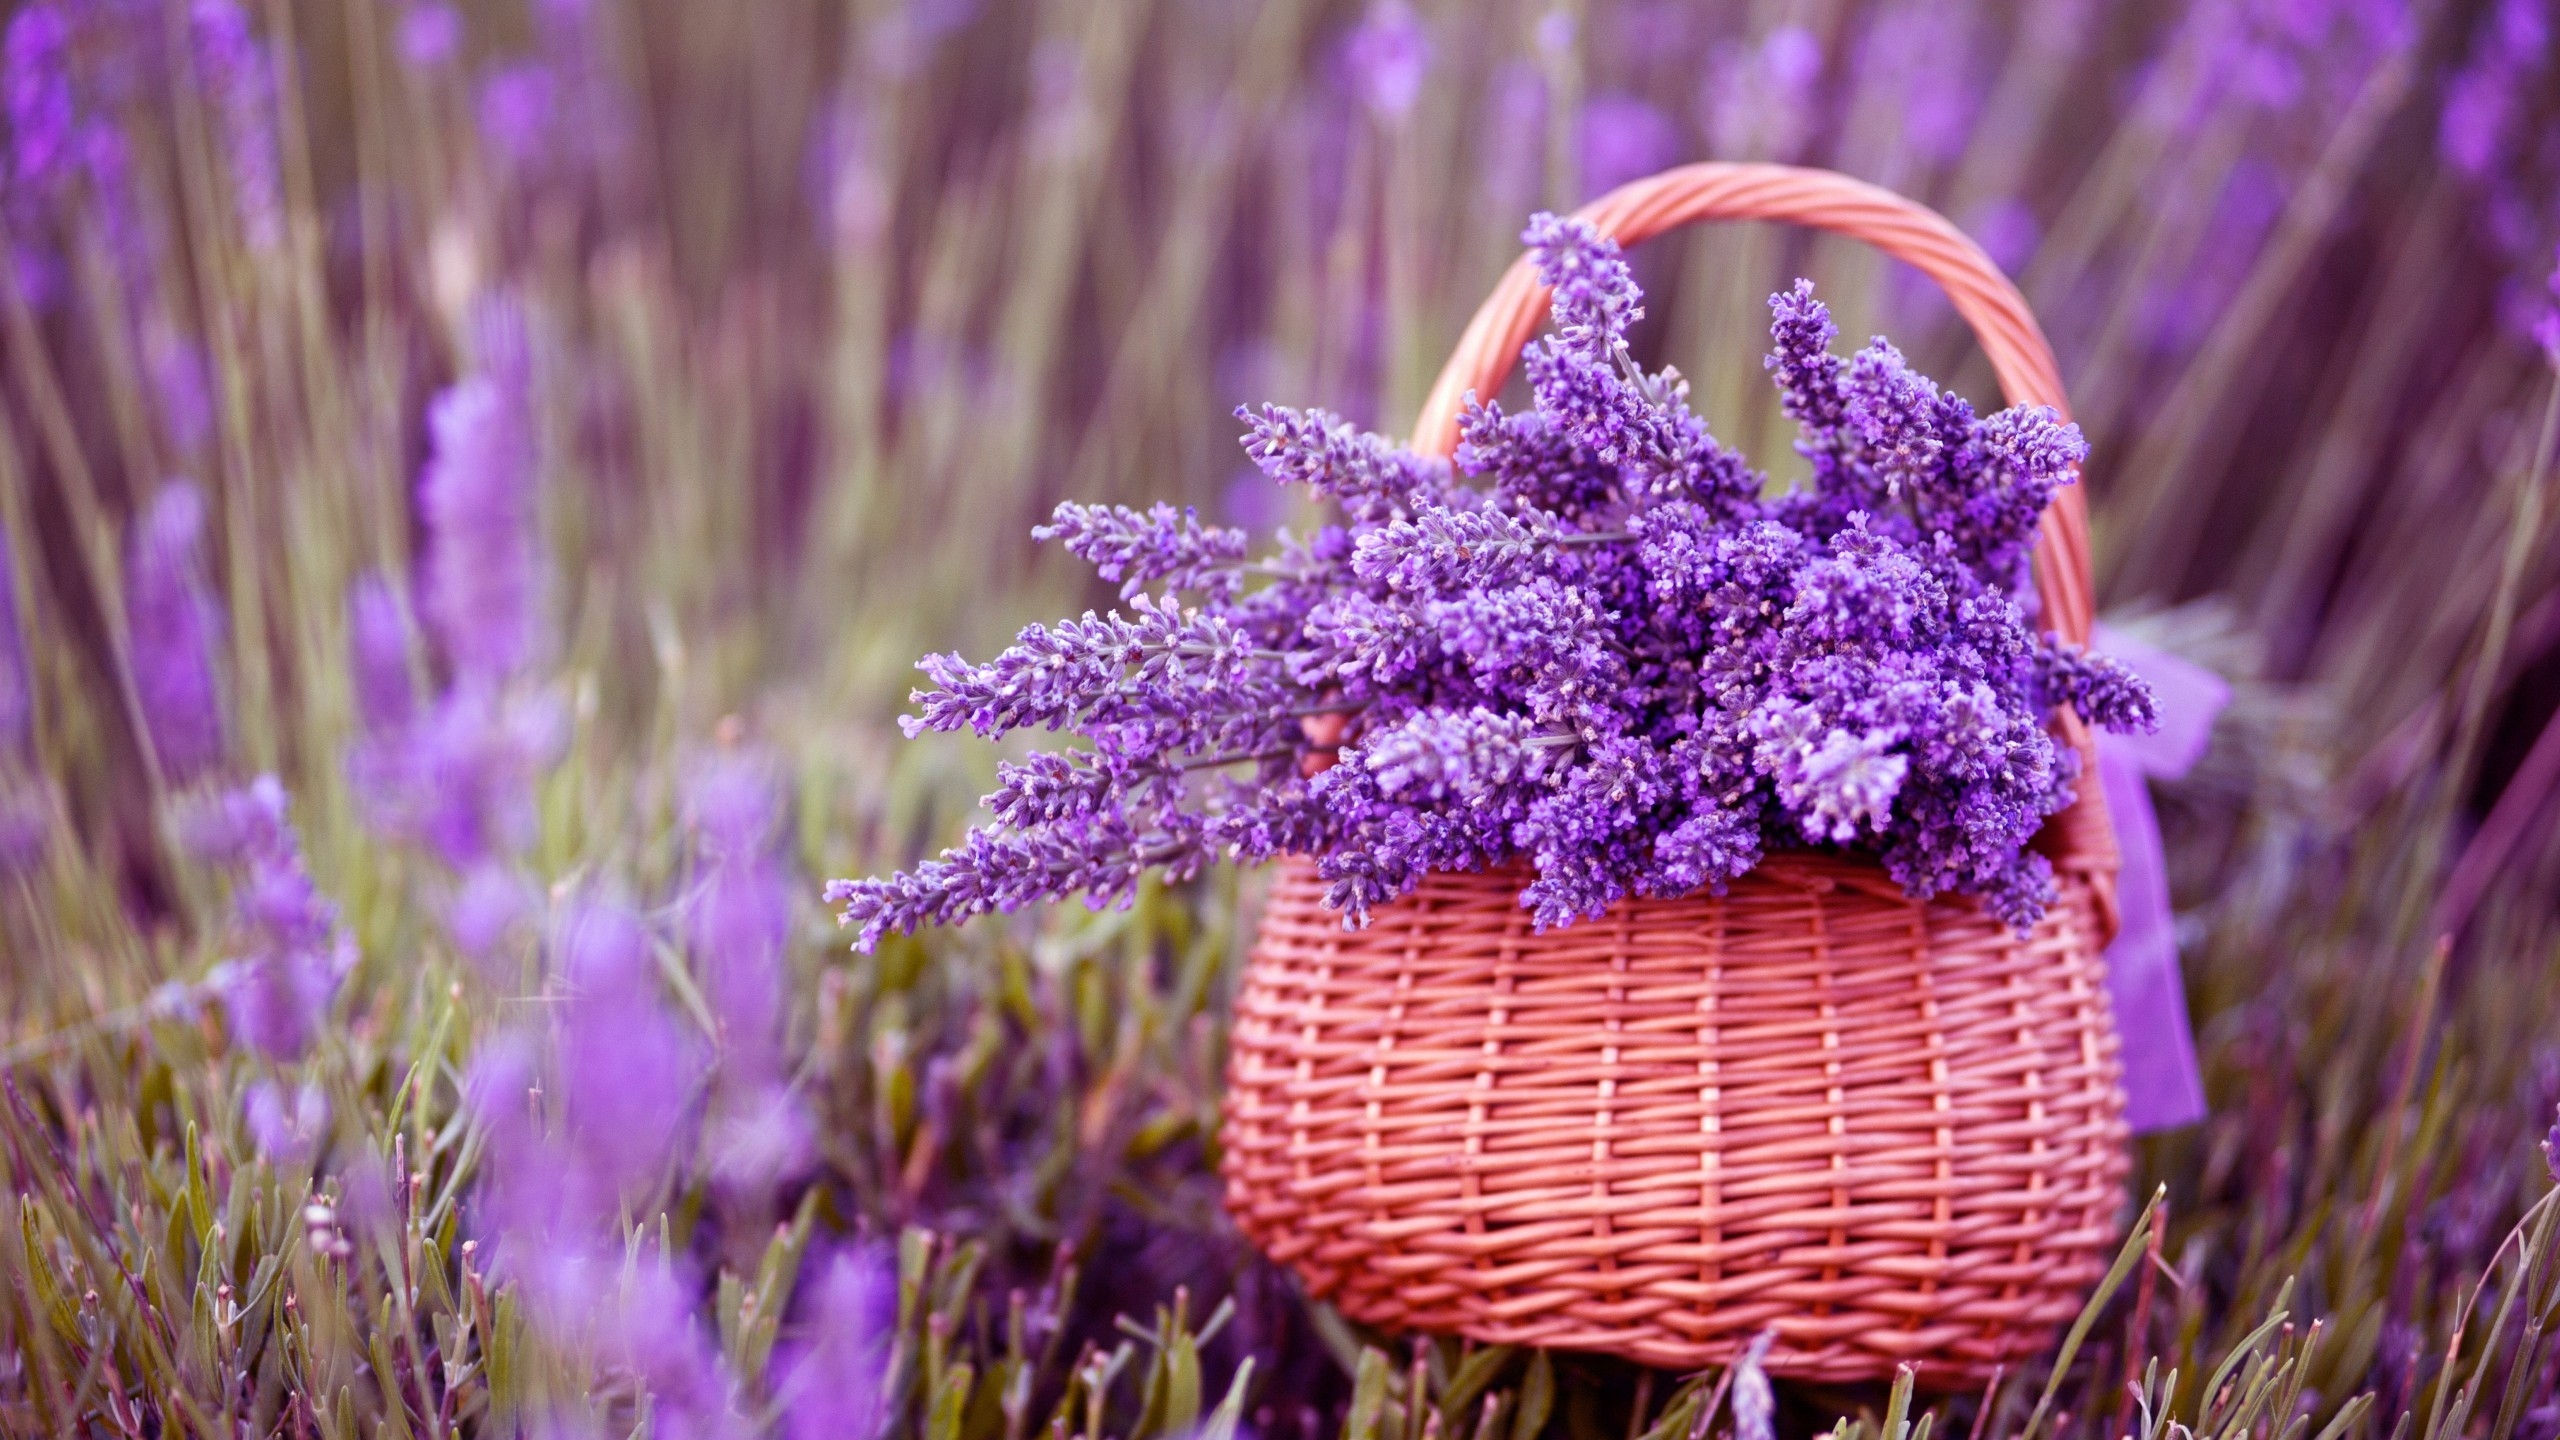 Beautiful Lavender Flowers for 2560x1440 HDTV resolution